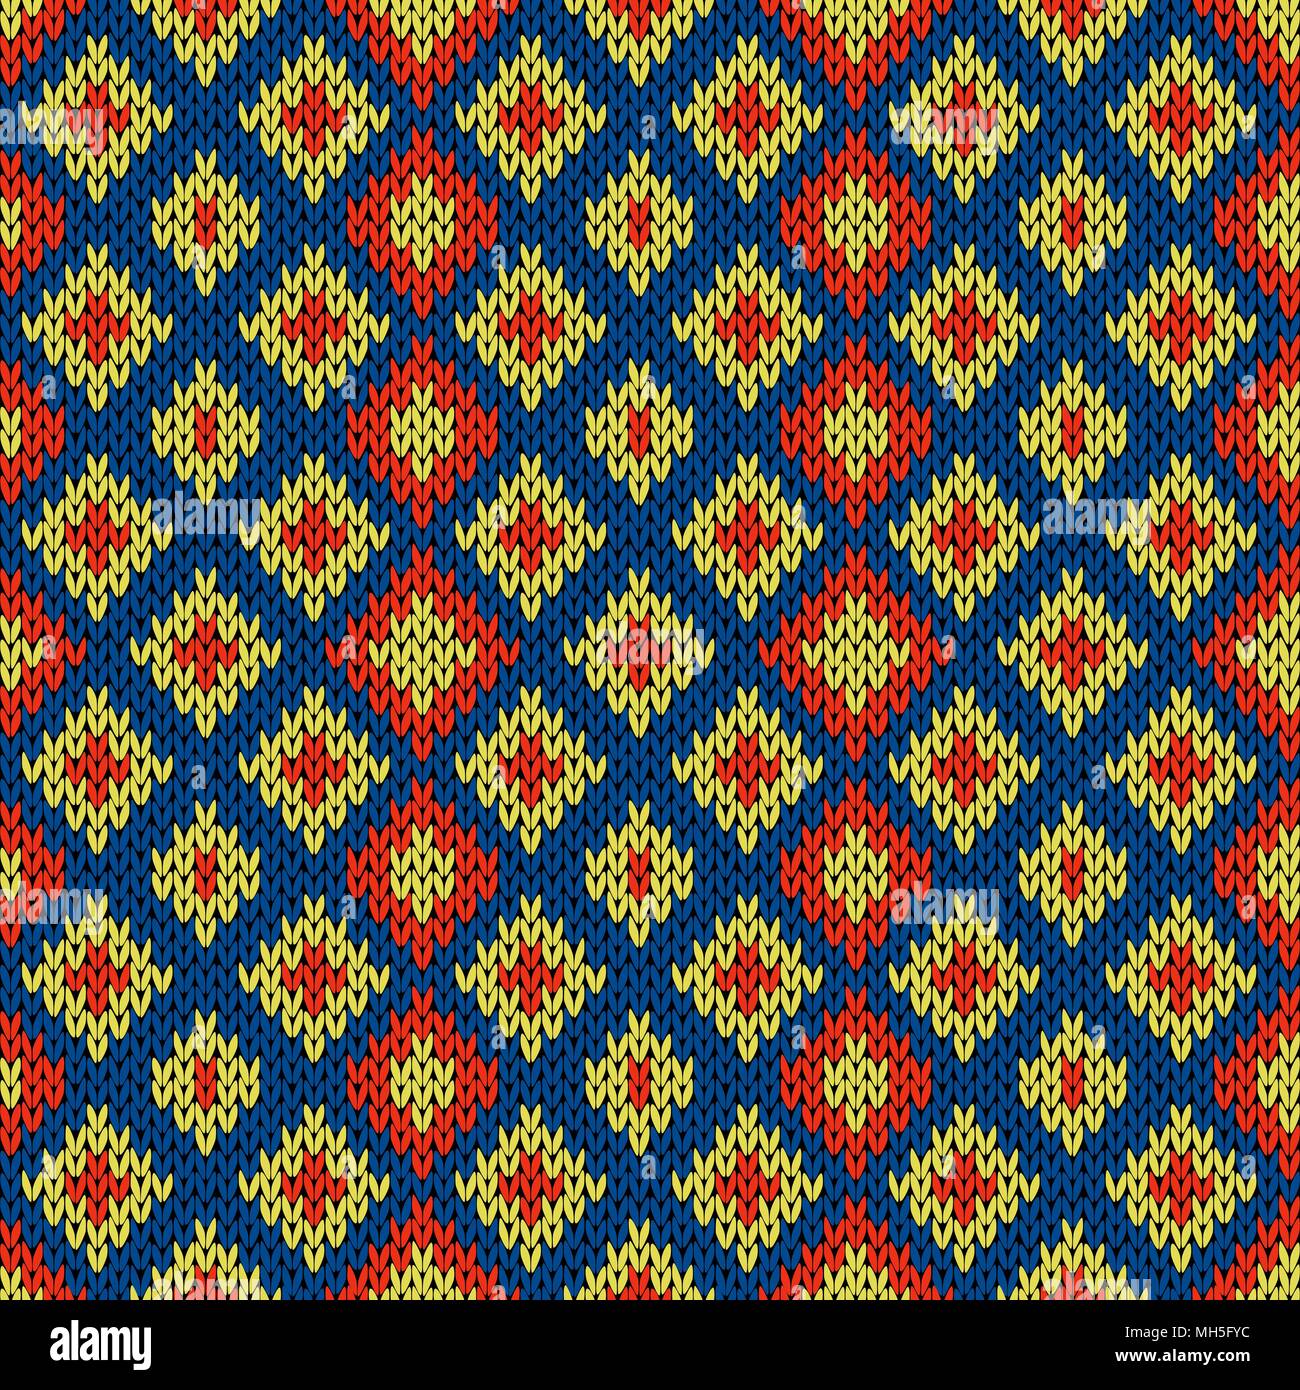 Knitted seamless symmetrical vector pattern with quadratic elements in blue, red and yellow colors as a fabric texture Stock Vector